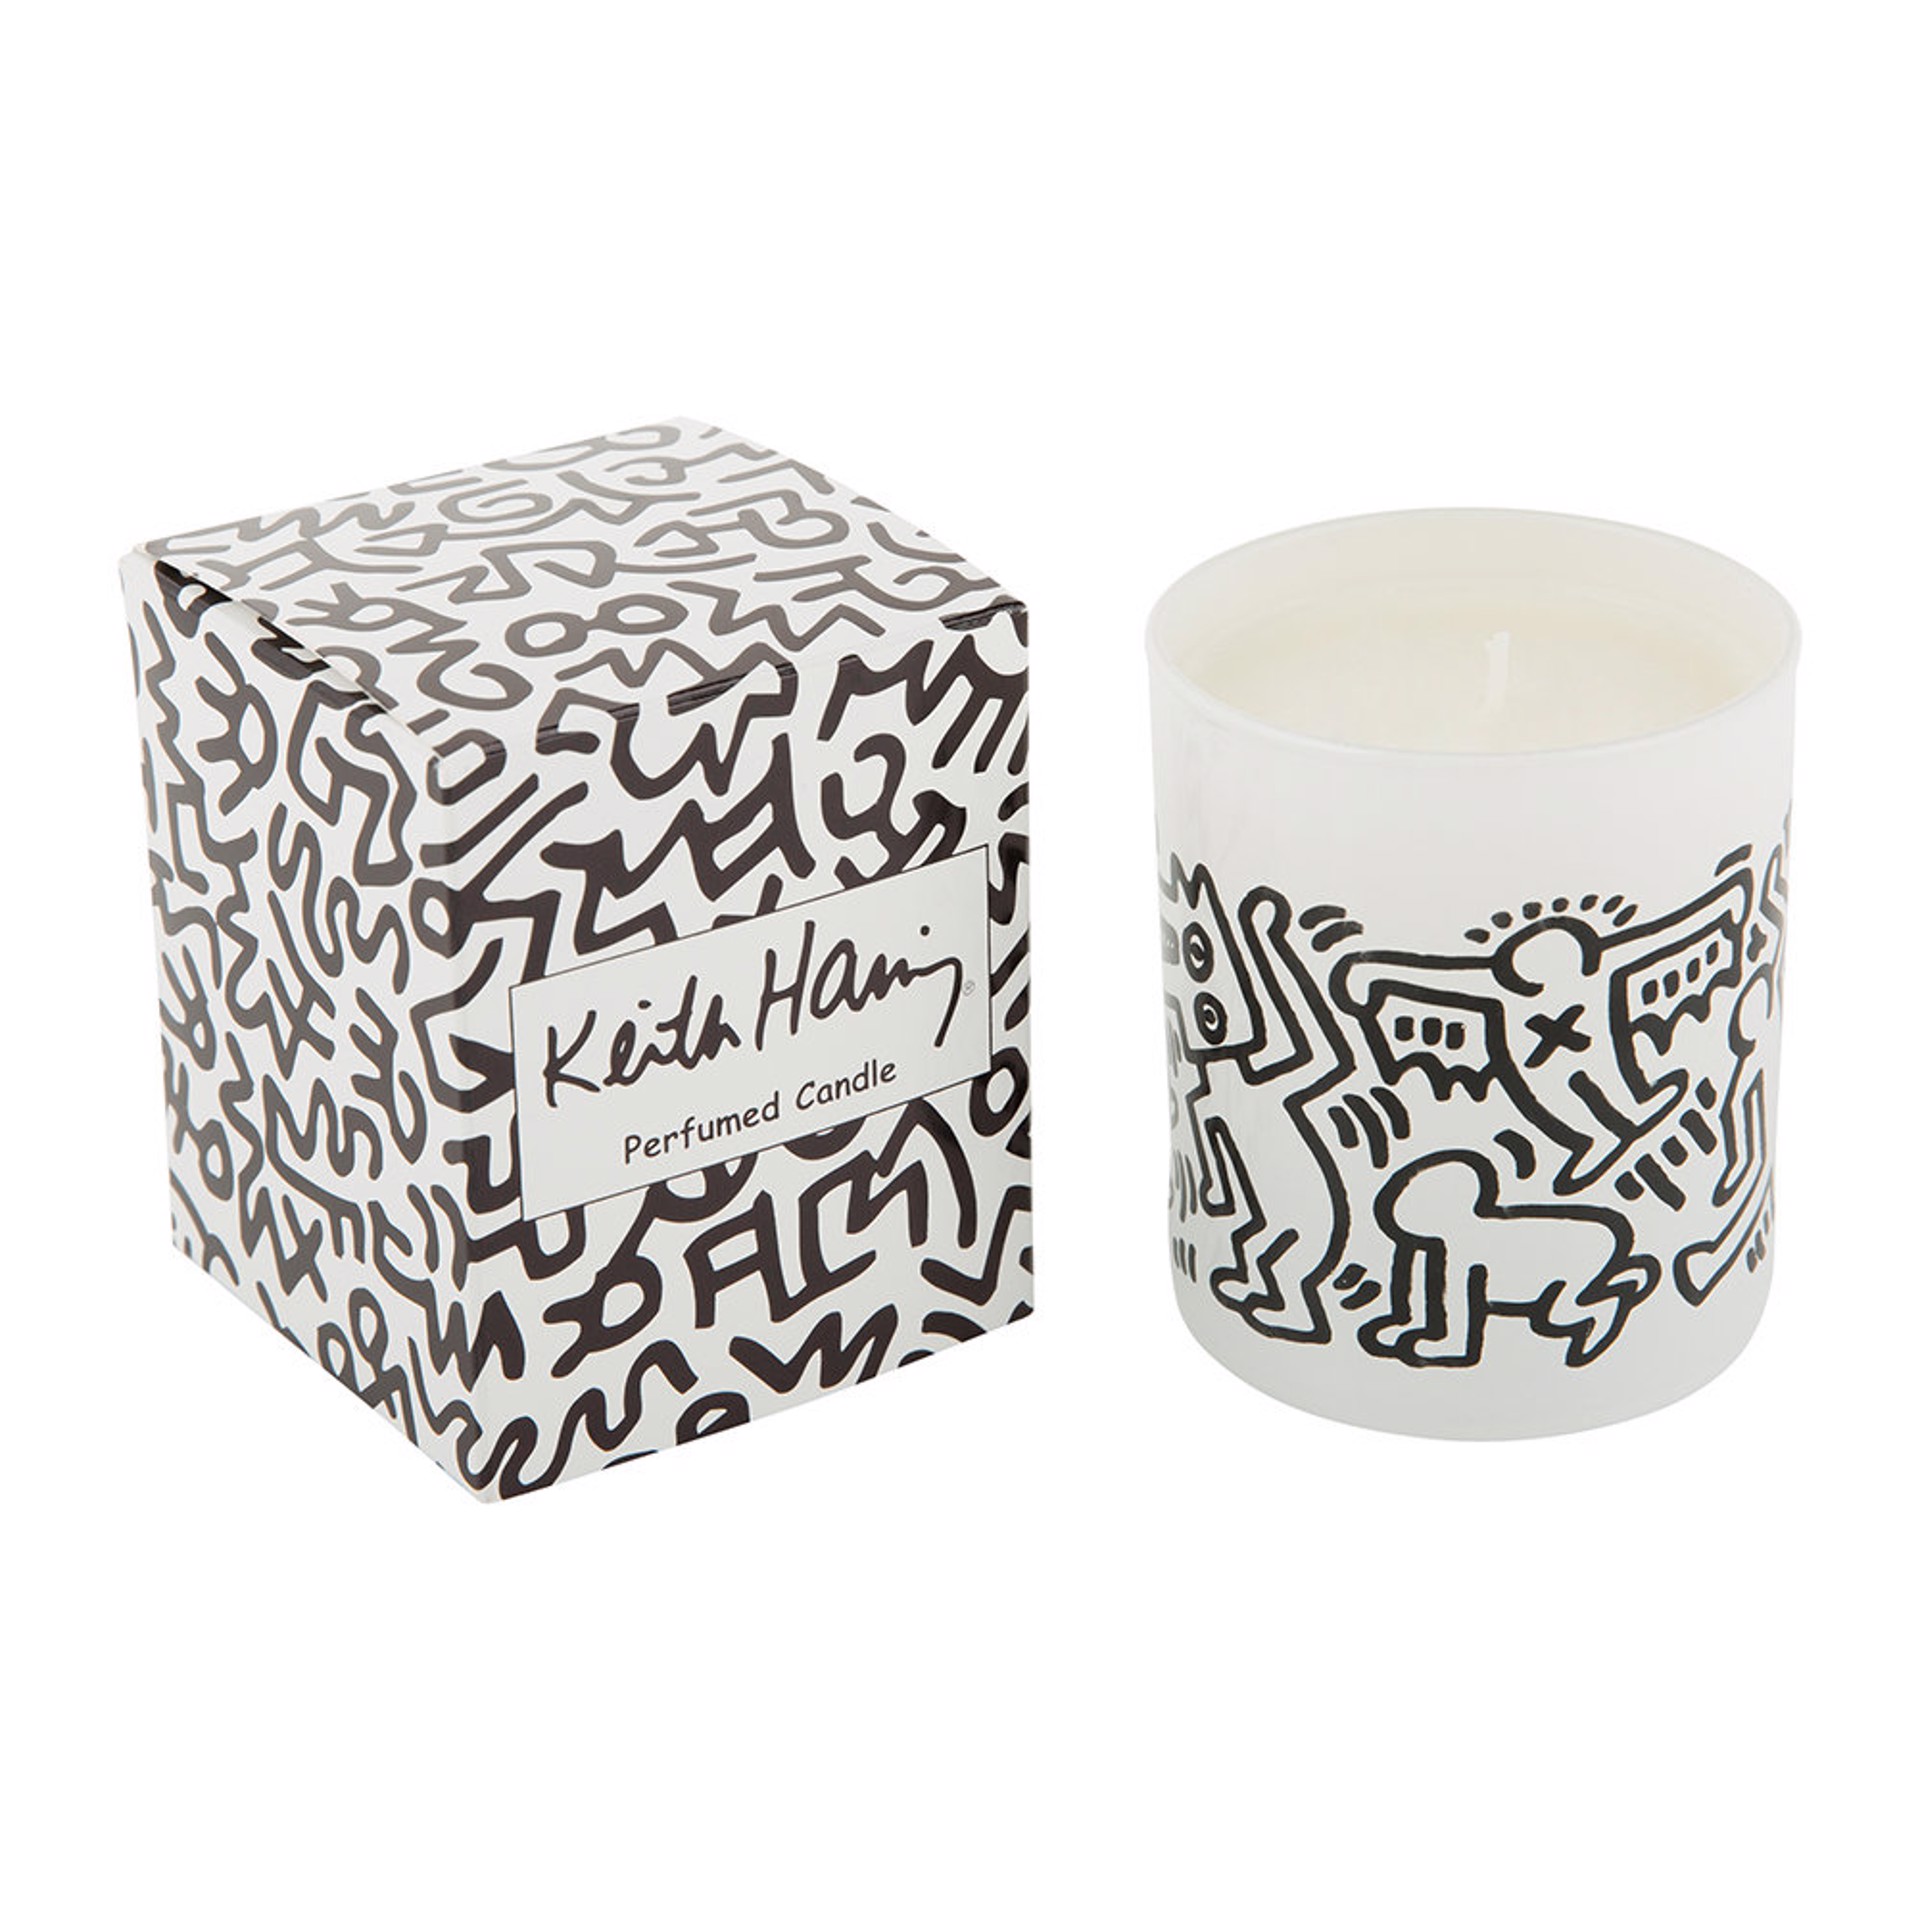 Scented Candle - Men Drawing - White by Keith Haring